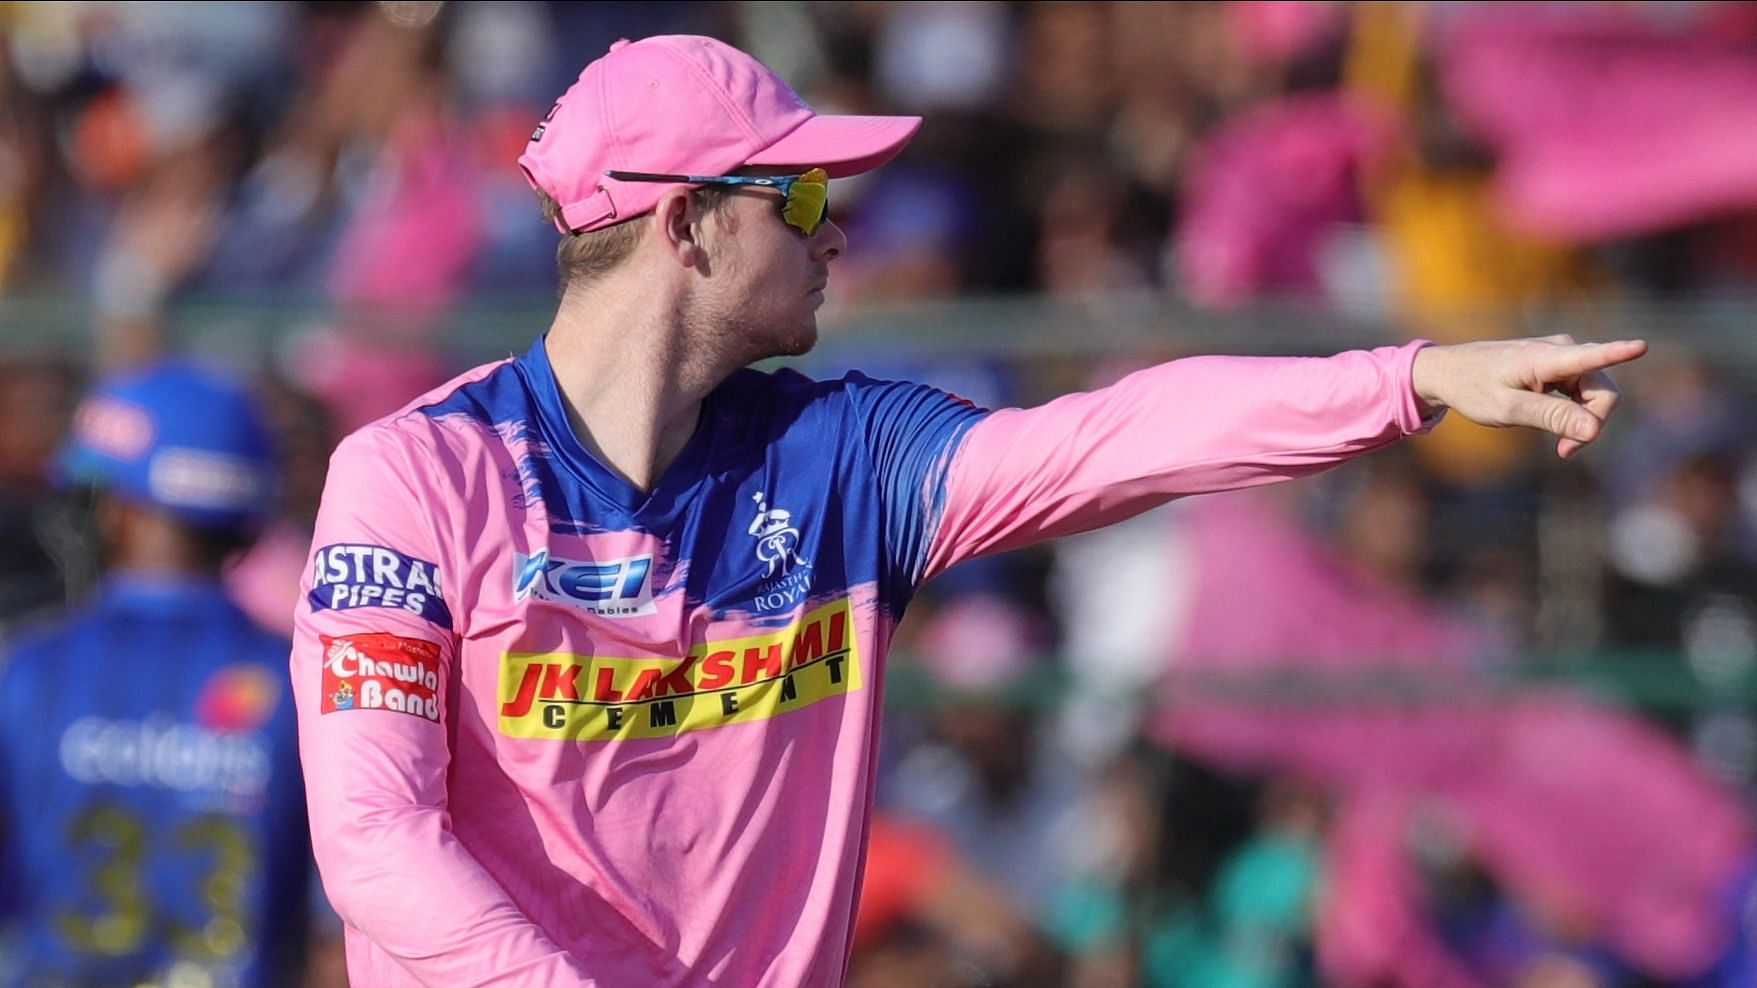 Steve Smith was named as the skipper for Rajasthan Royals in place of Ajinkya Rahane for the remaining season.